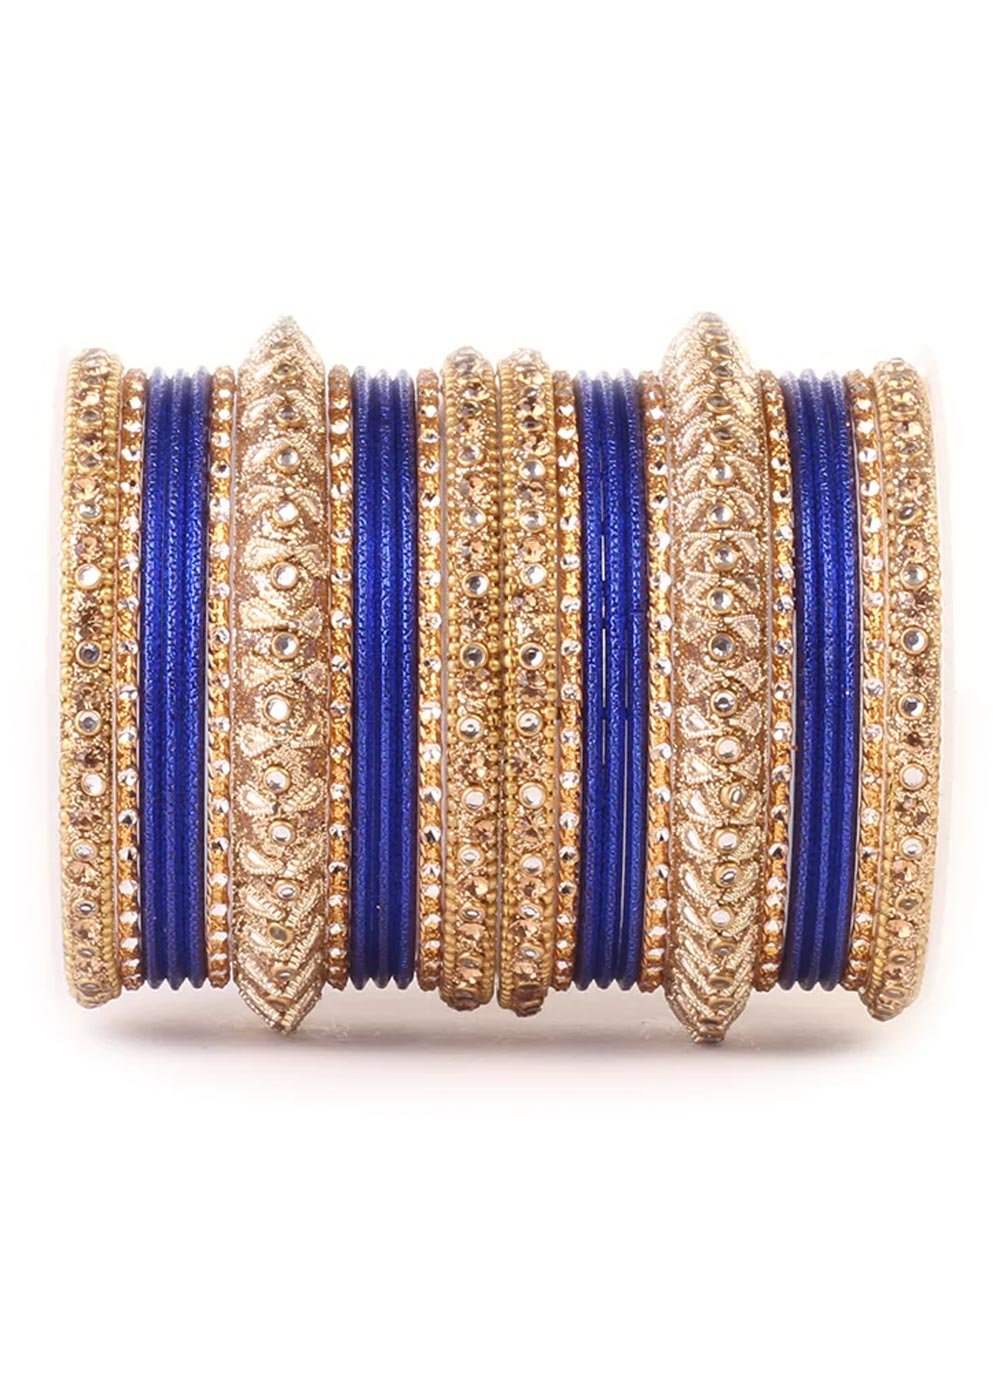 Charming Gold Rodium Polish Stone Work Blue and Gold Bangles for Festival